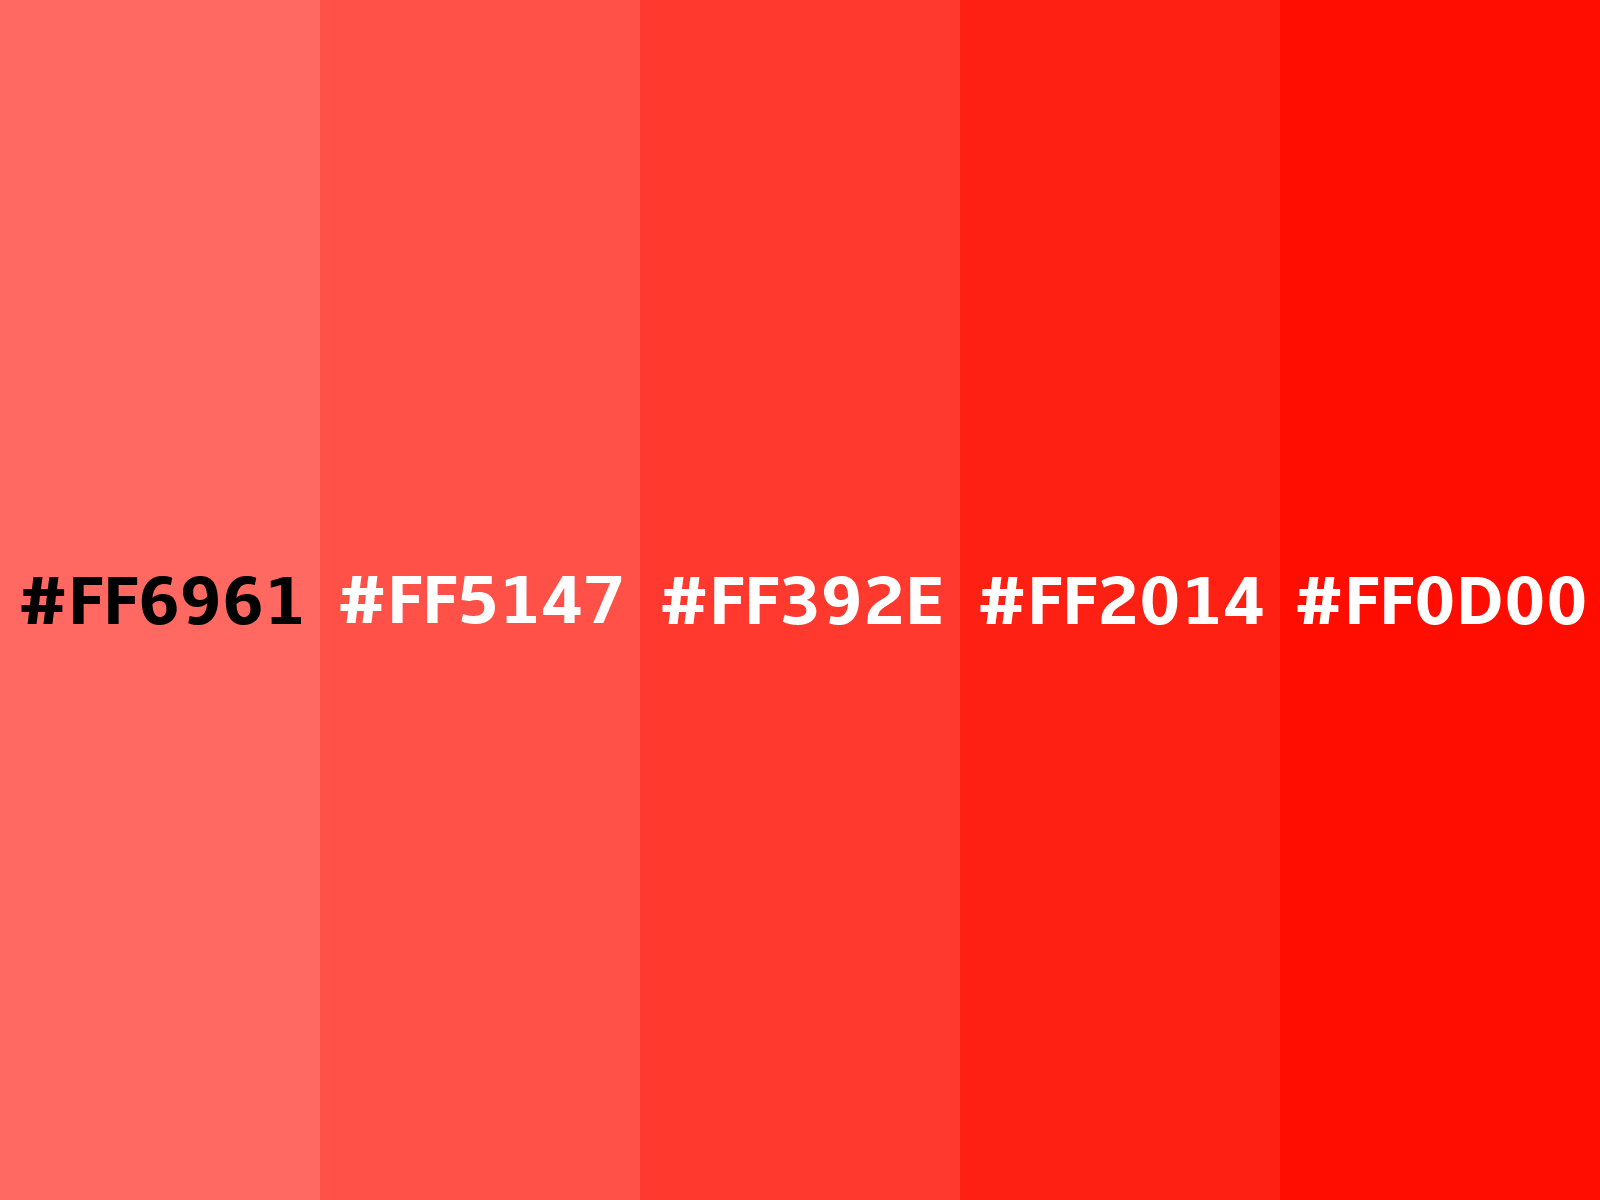 Converting Colors - Pastel red